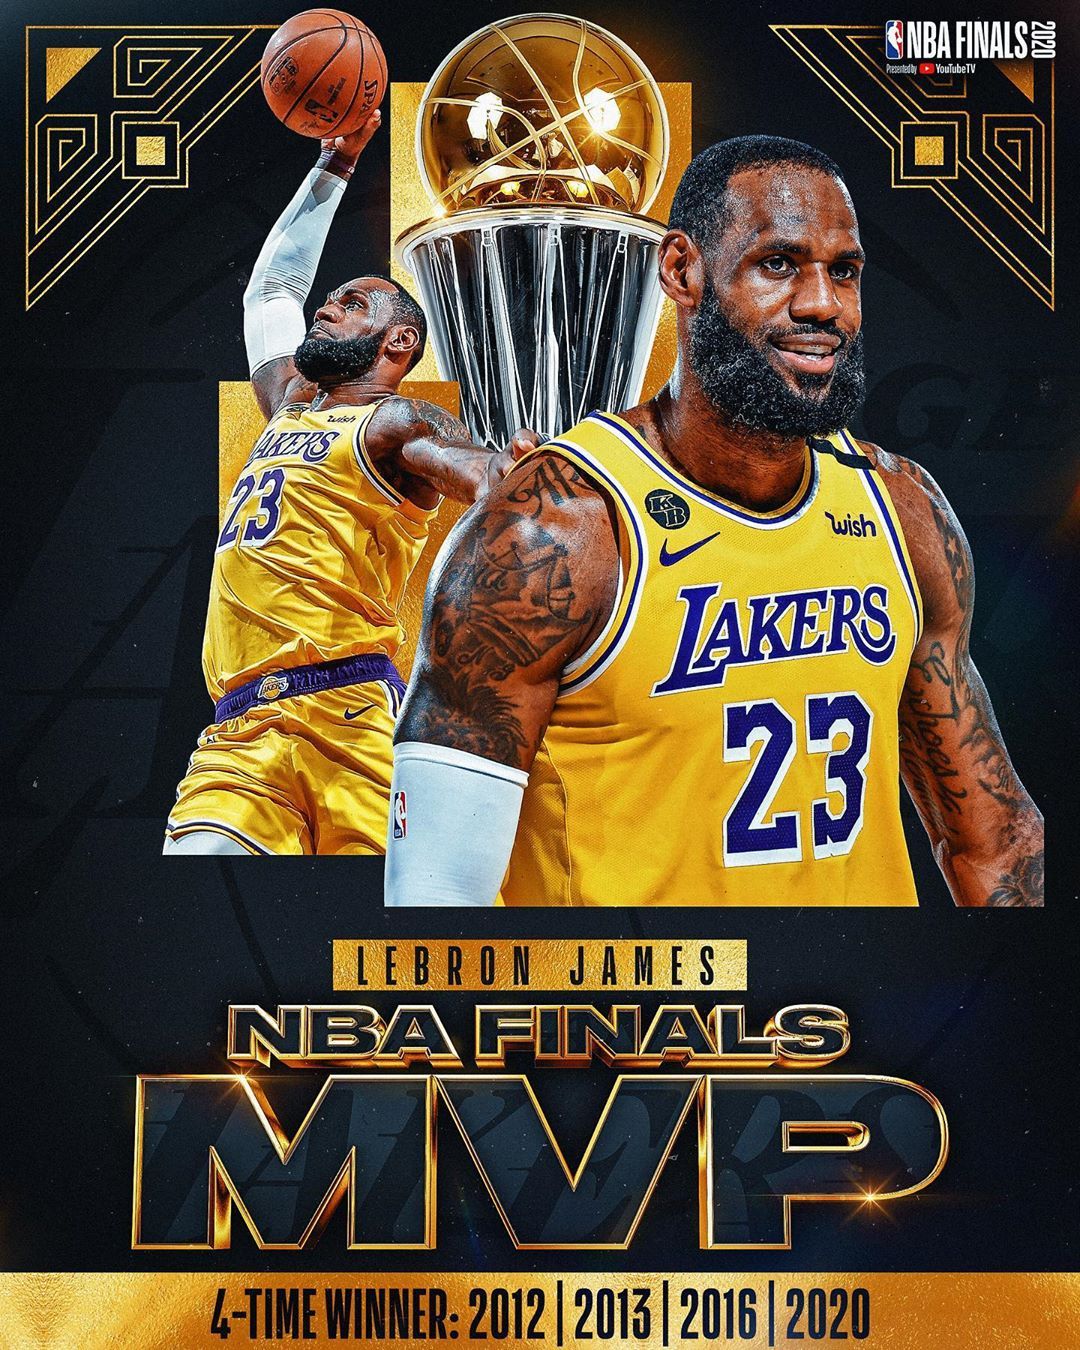 WholeNewGame • on Instagram: “The 2020 Bill Russell #NBAFinals MVP. of the #LakeS. Lebron james finals, Lebron james, Lebron james lakers